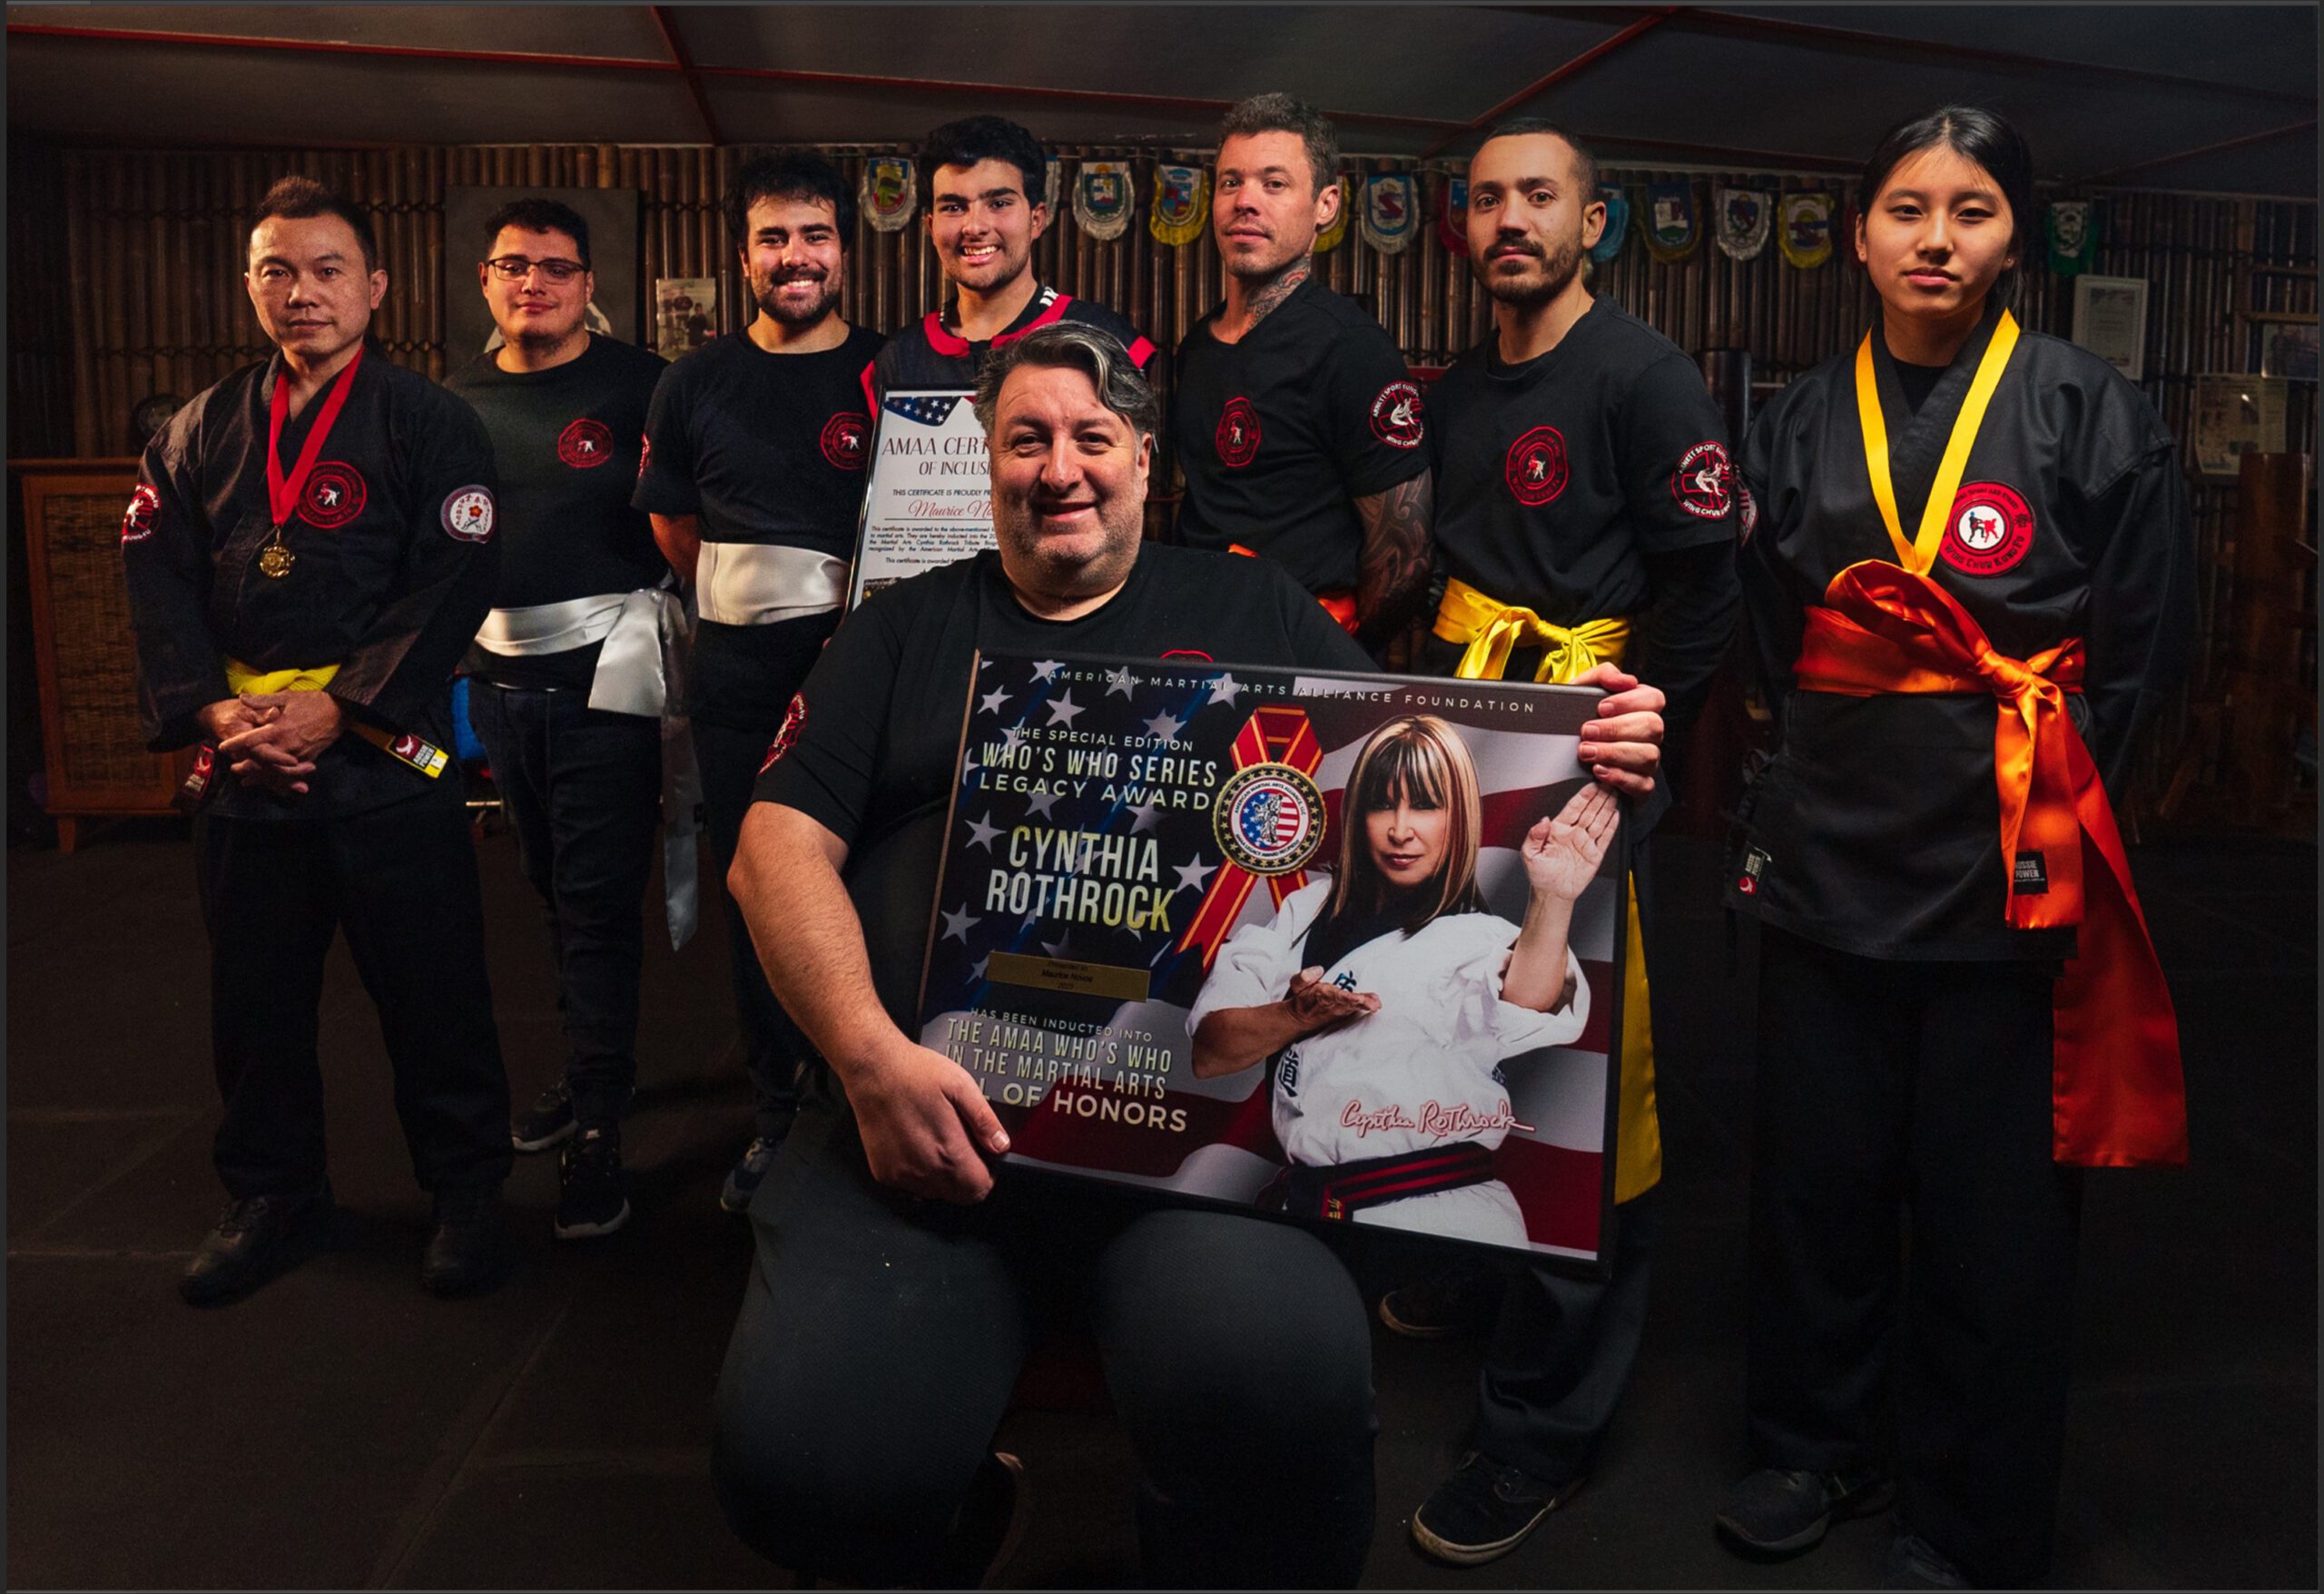 Sifu Maurice with AMAA Award and his students in Melbourne Wing Chun Academy